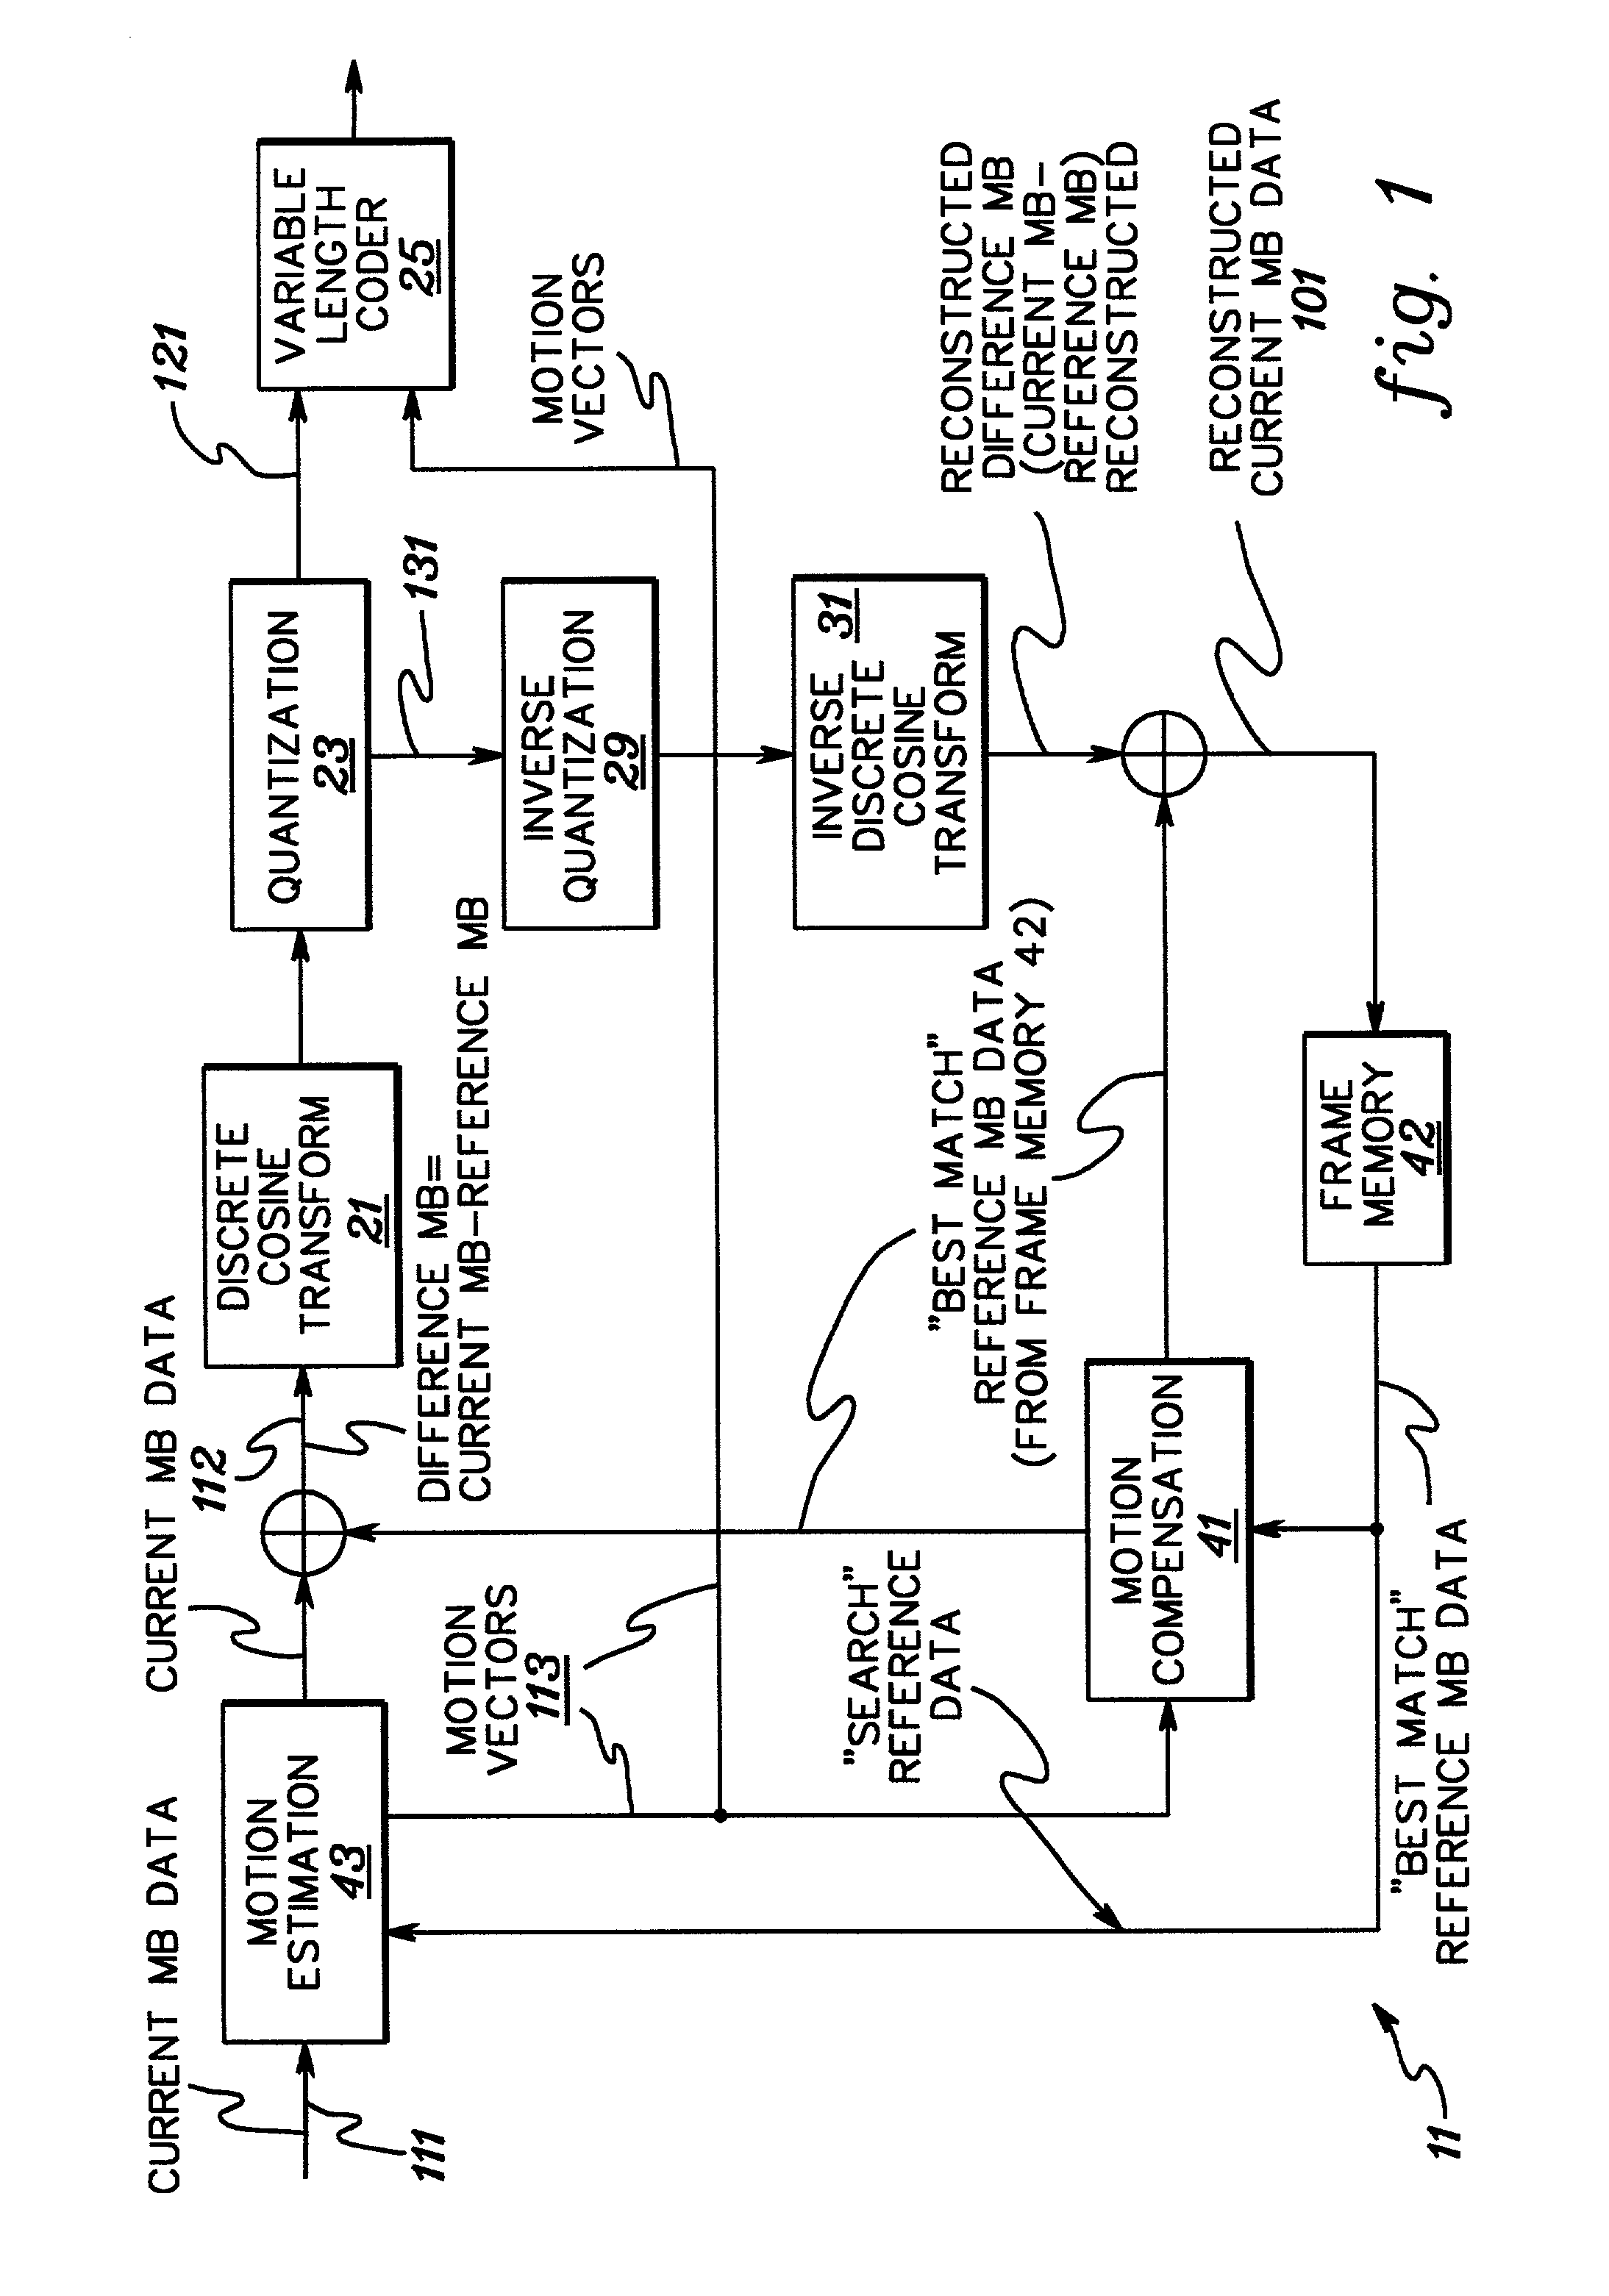 Multiple parallel encoders and statistical analysis thereof for encoding a video sequence